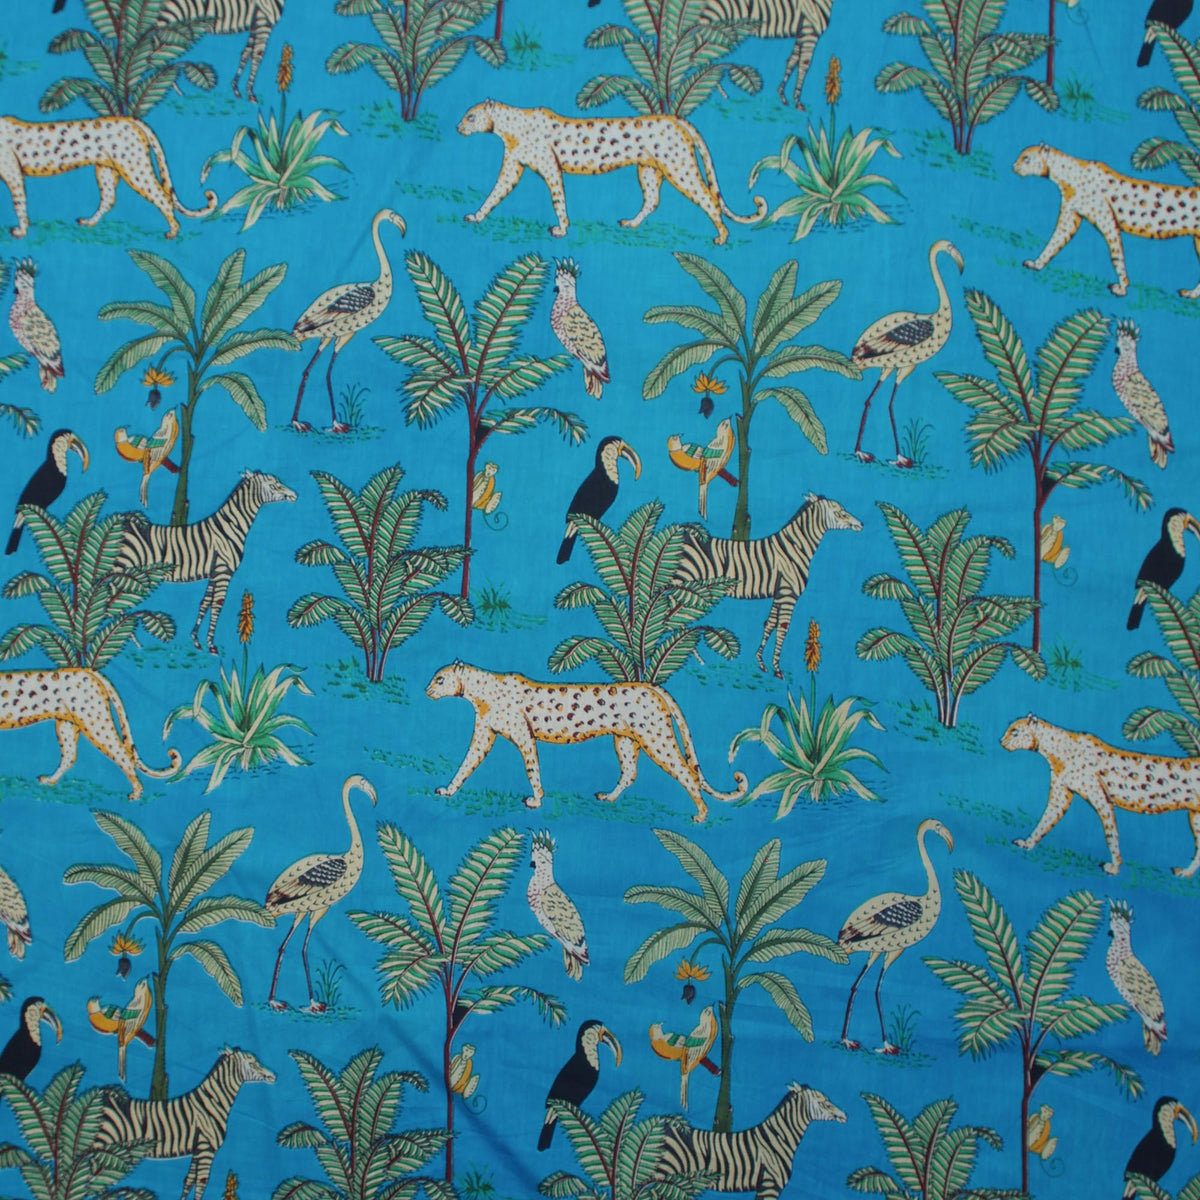 Blue Panther Hand Screen Printed Cotton Fabric Design 300